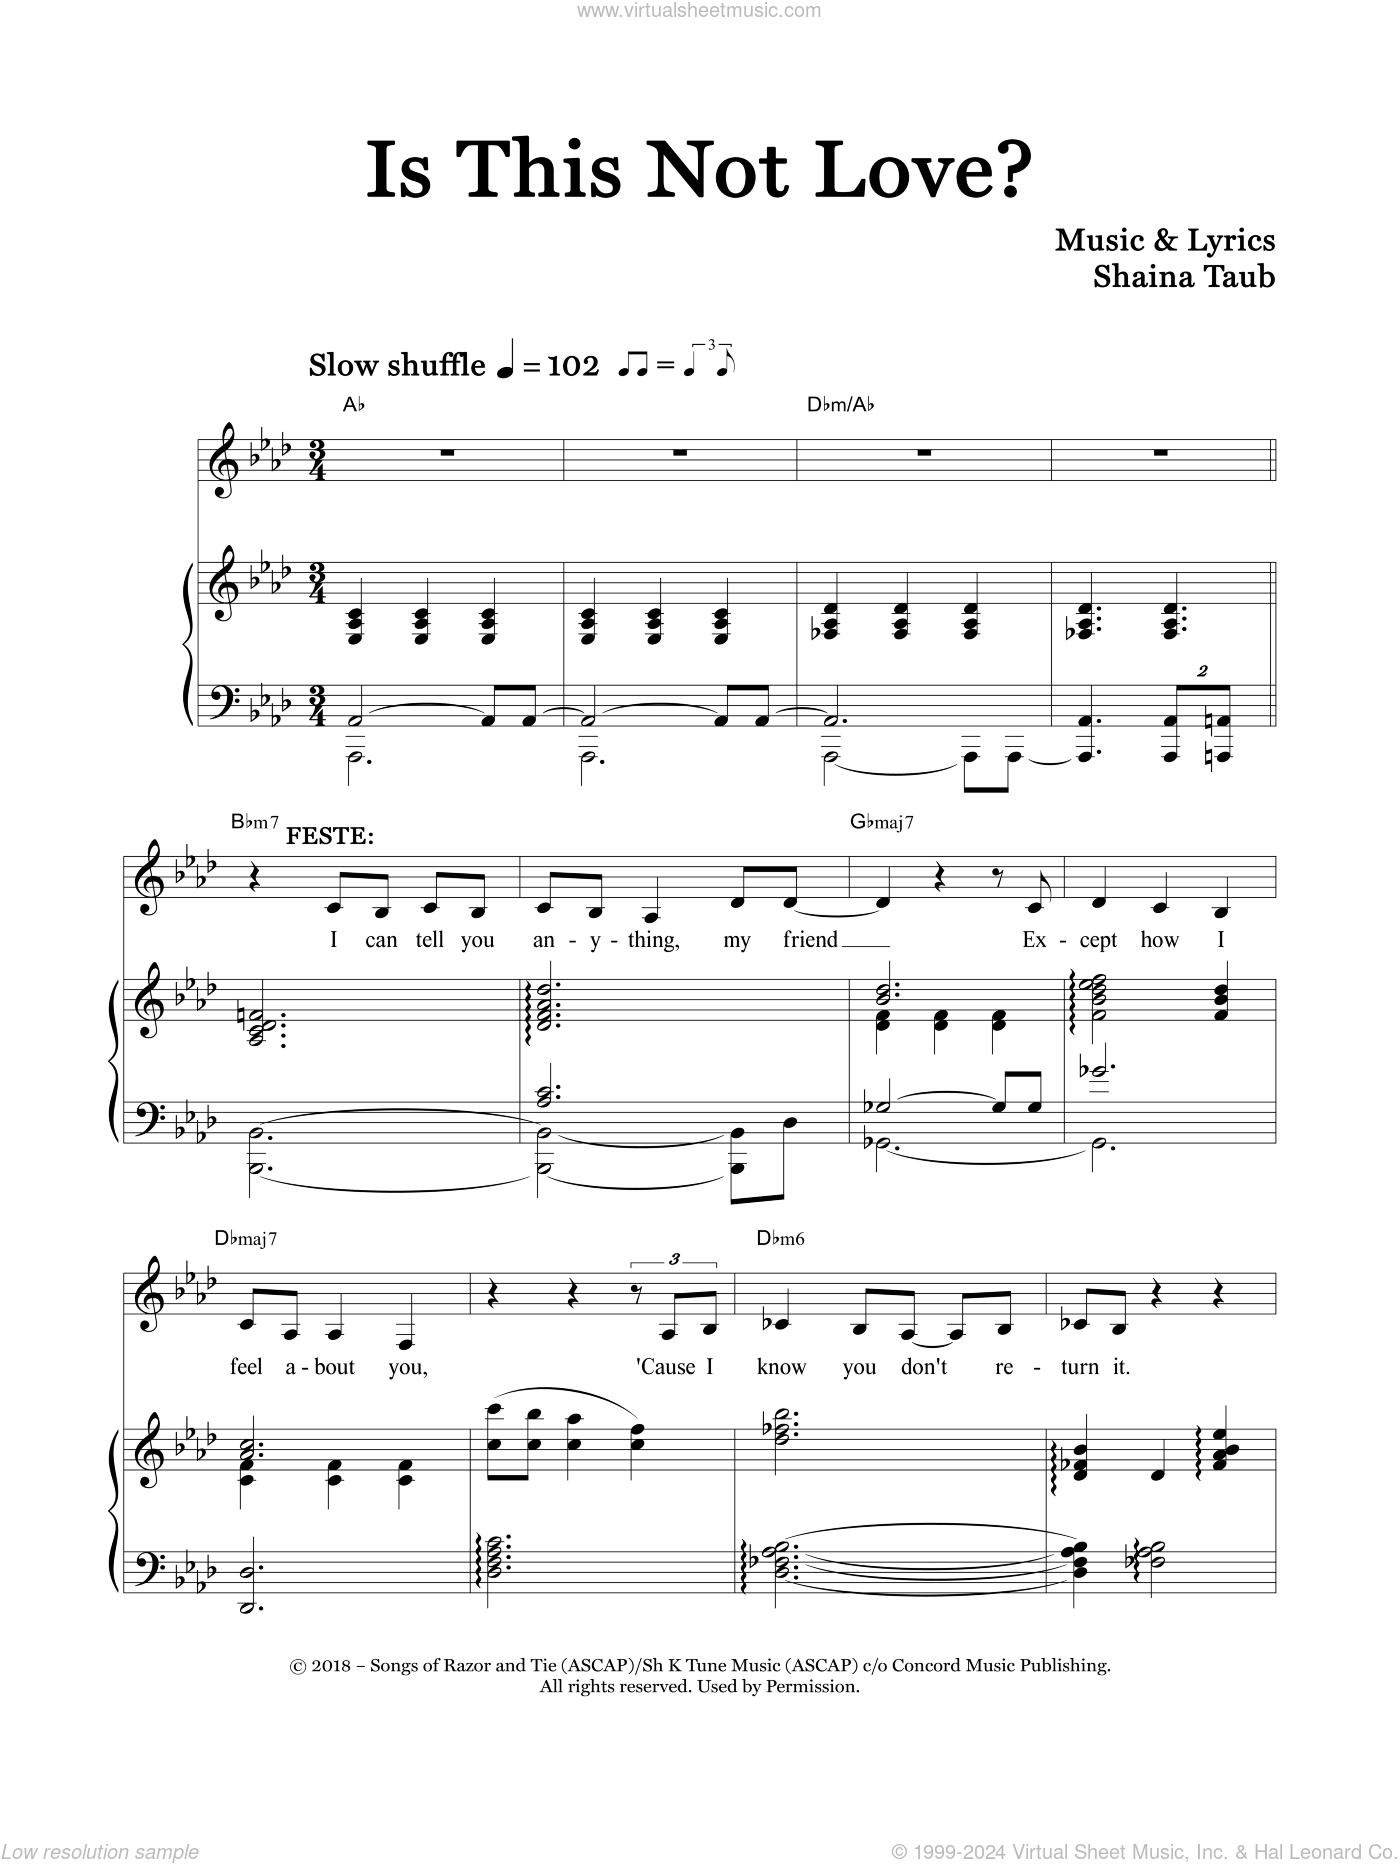 Is This Not Love? (from Twelfth Night) sheet music for voice and piano